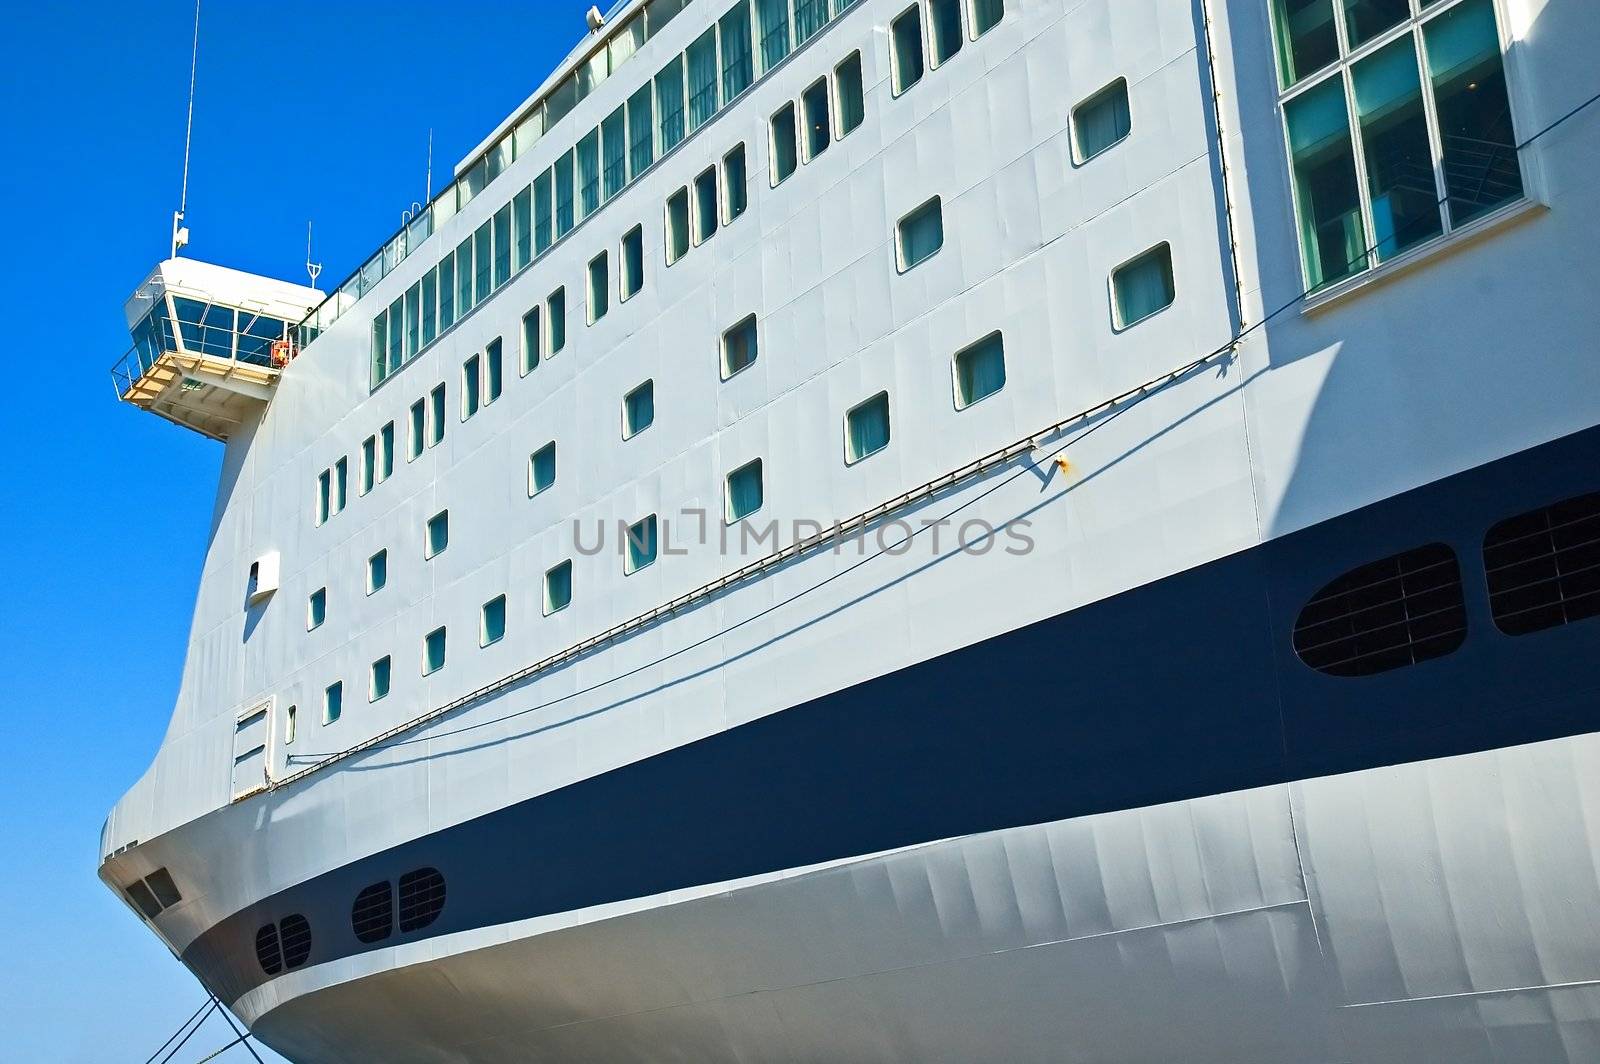 Cruise ship detail by sil